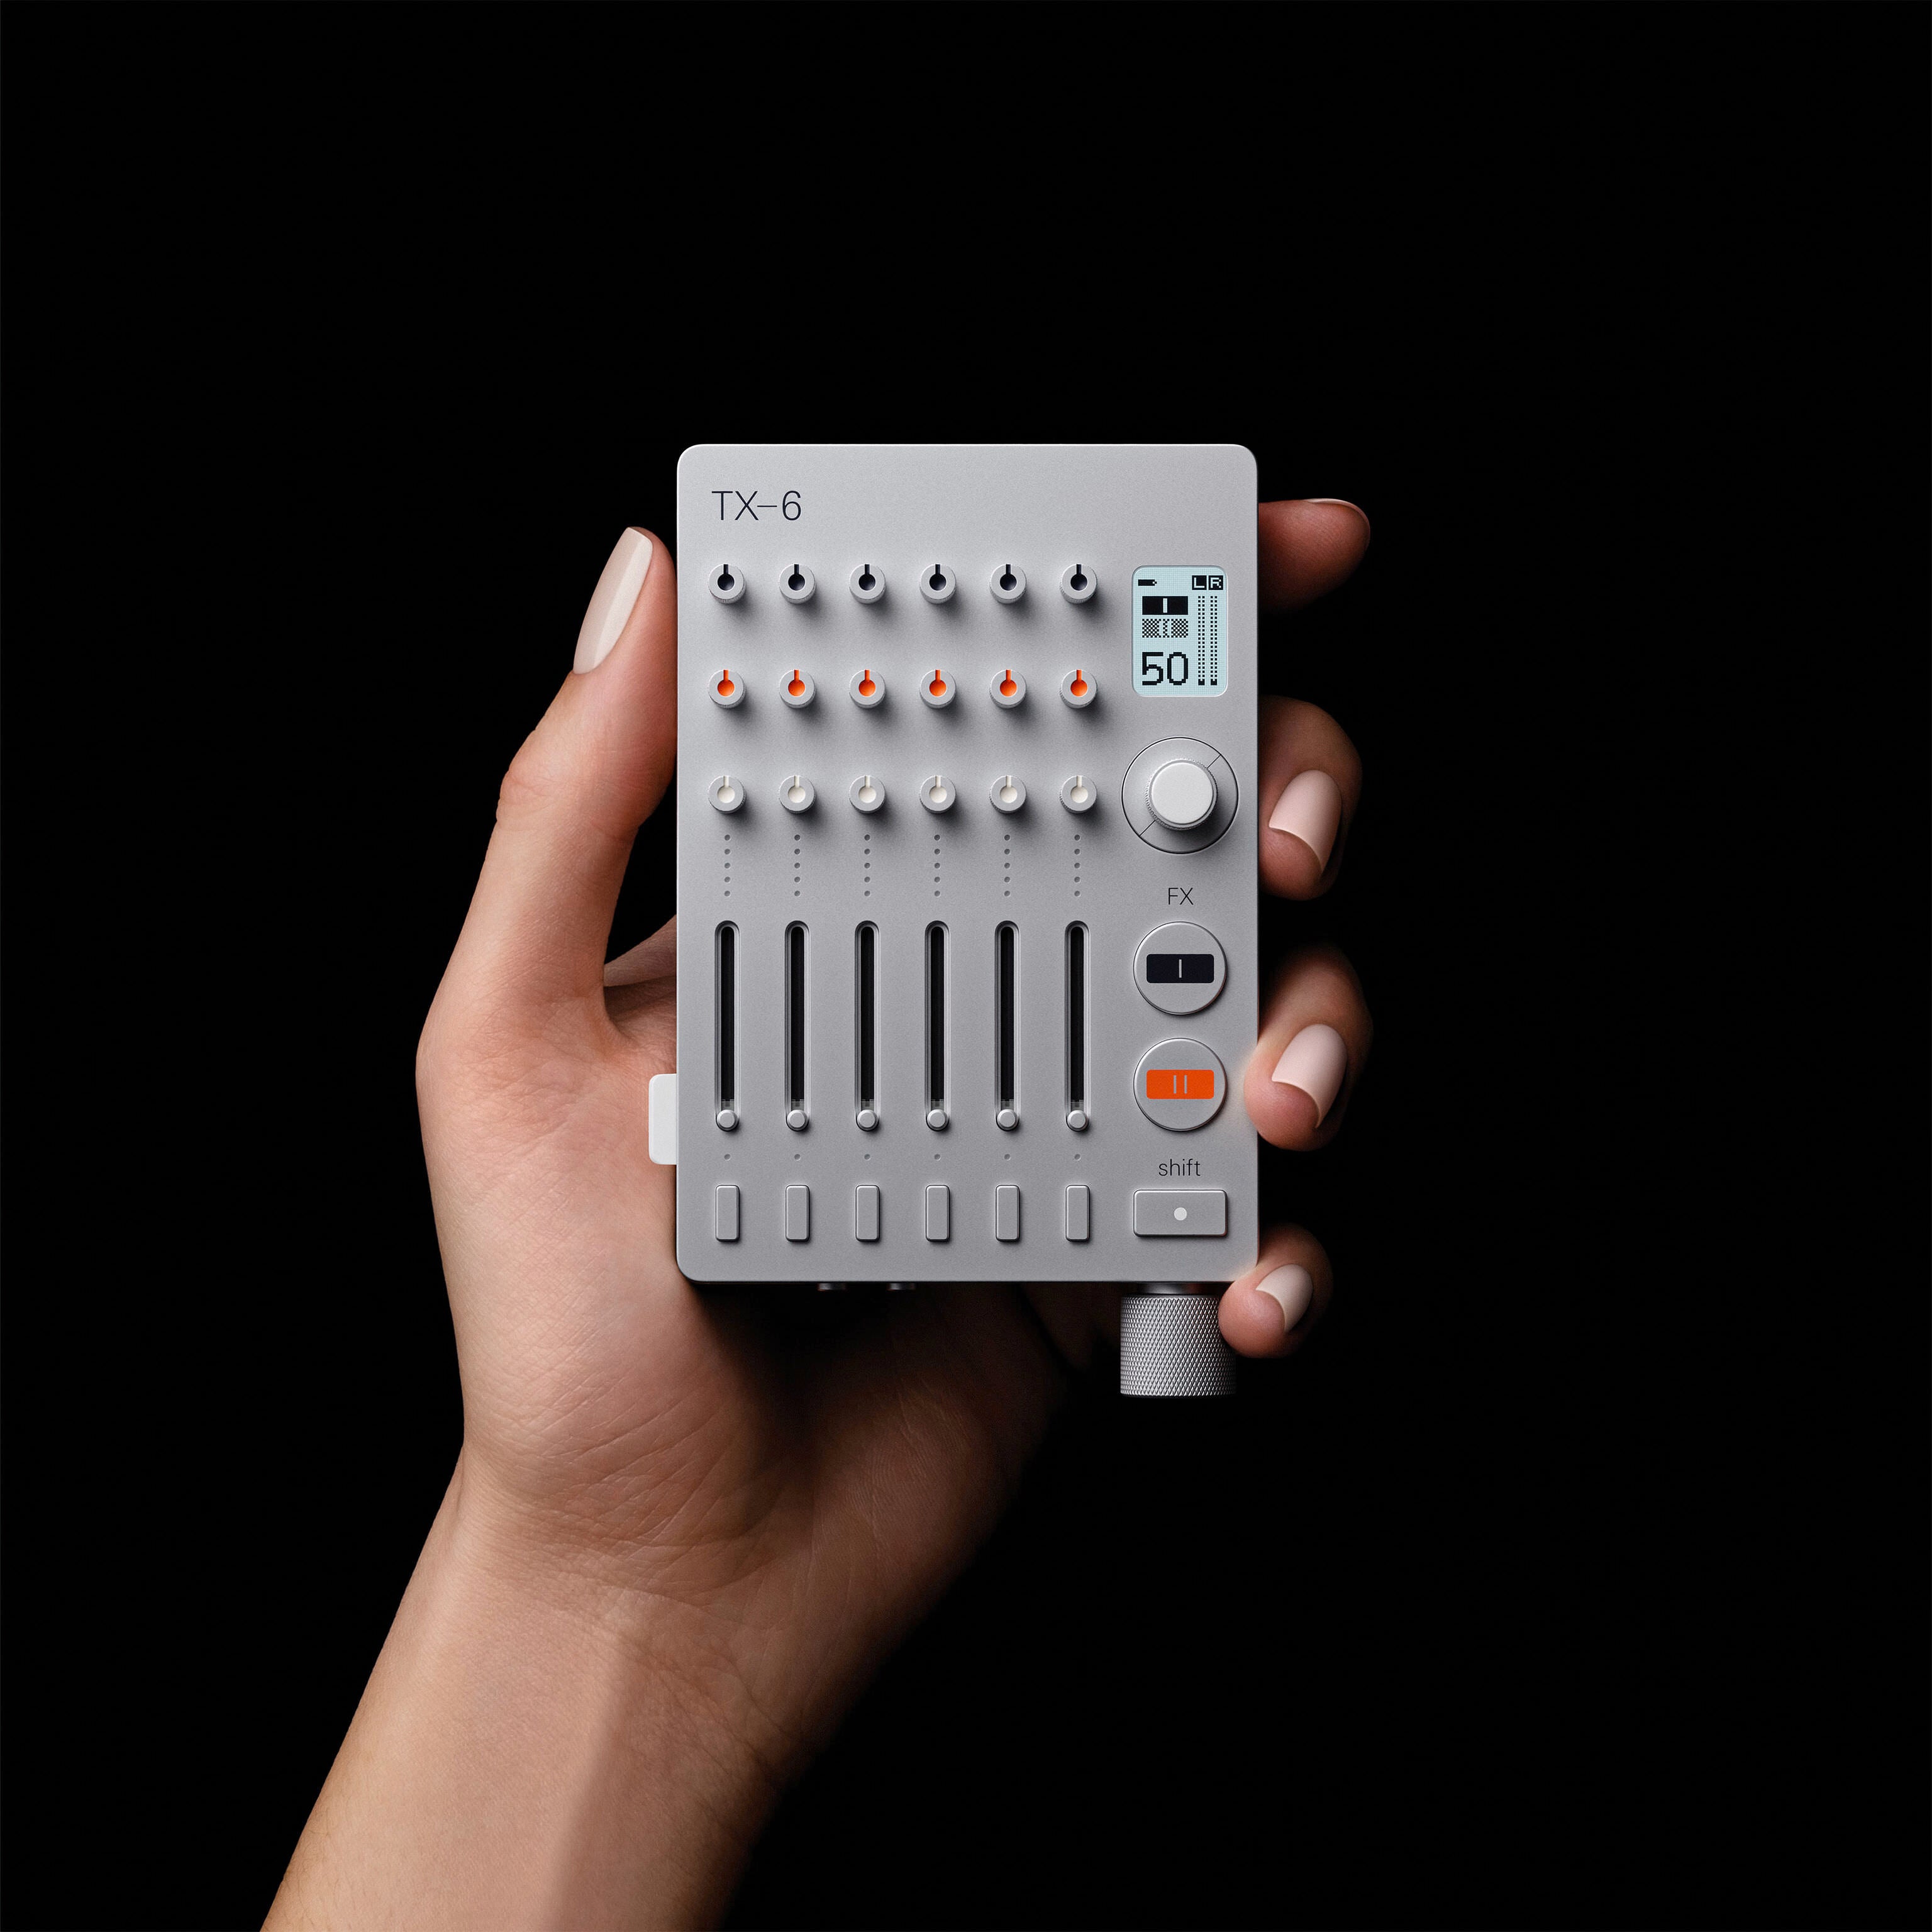 Teenage Engineering OP-1 Field Portable Synthesizer – MoMA Design